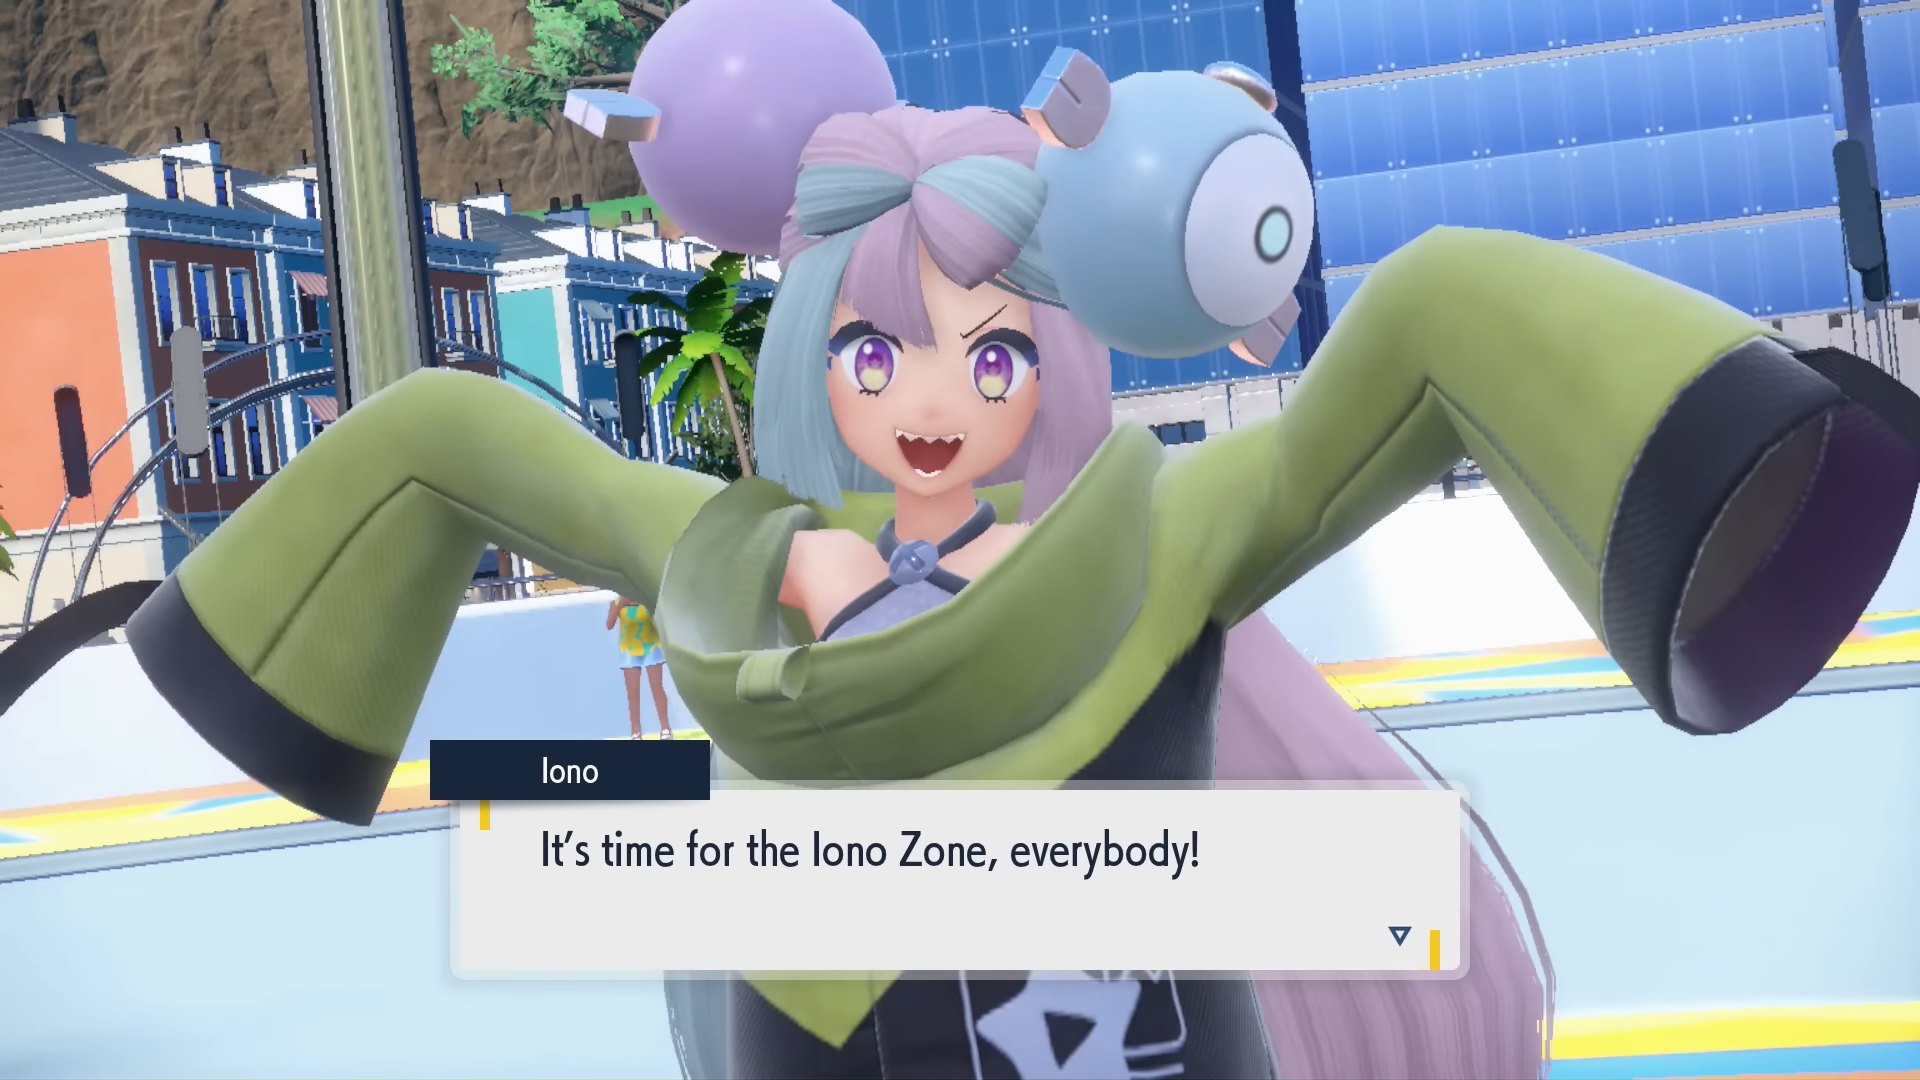 It's time to enter the Iono Zone!